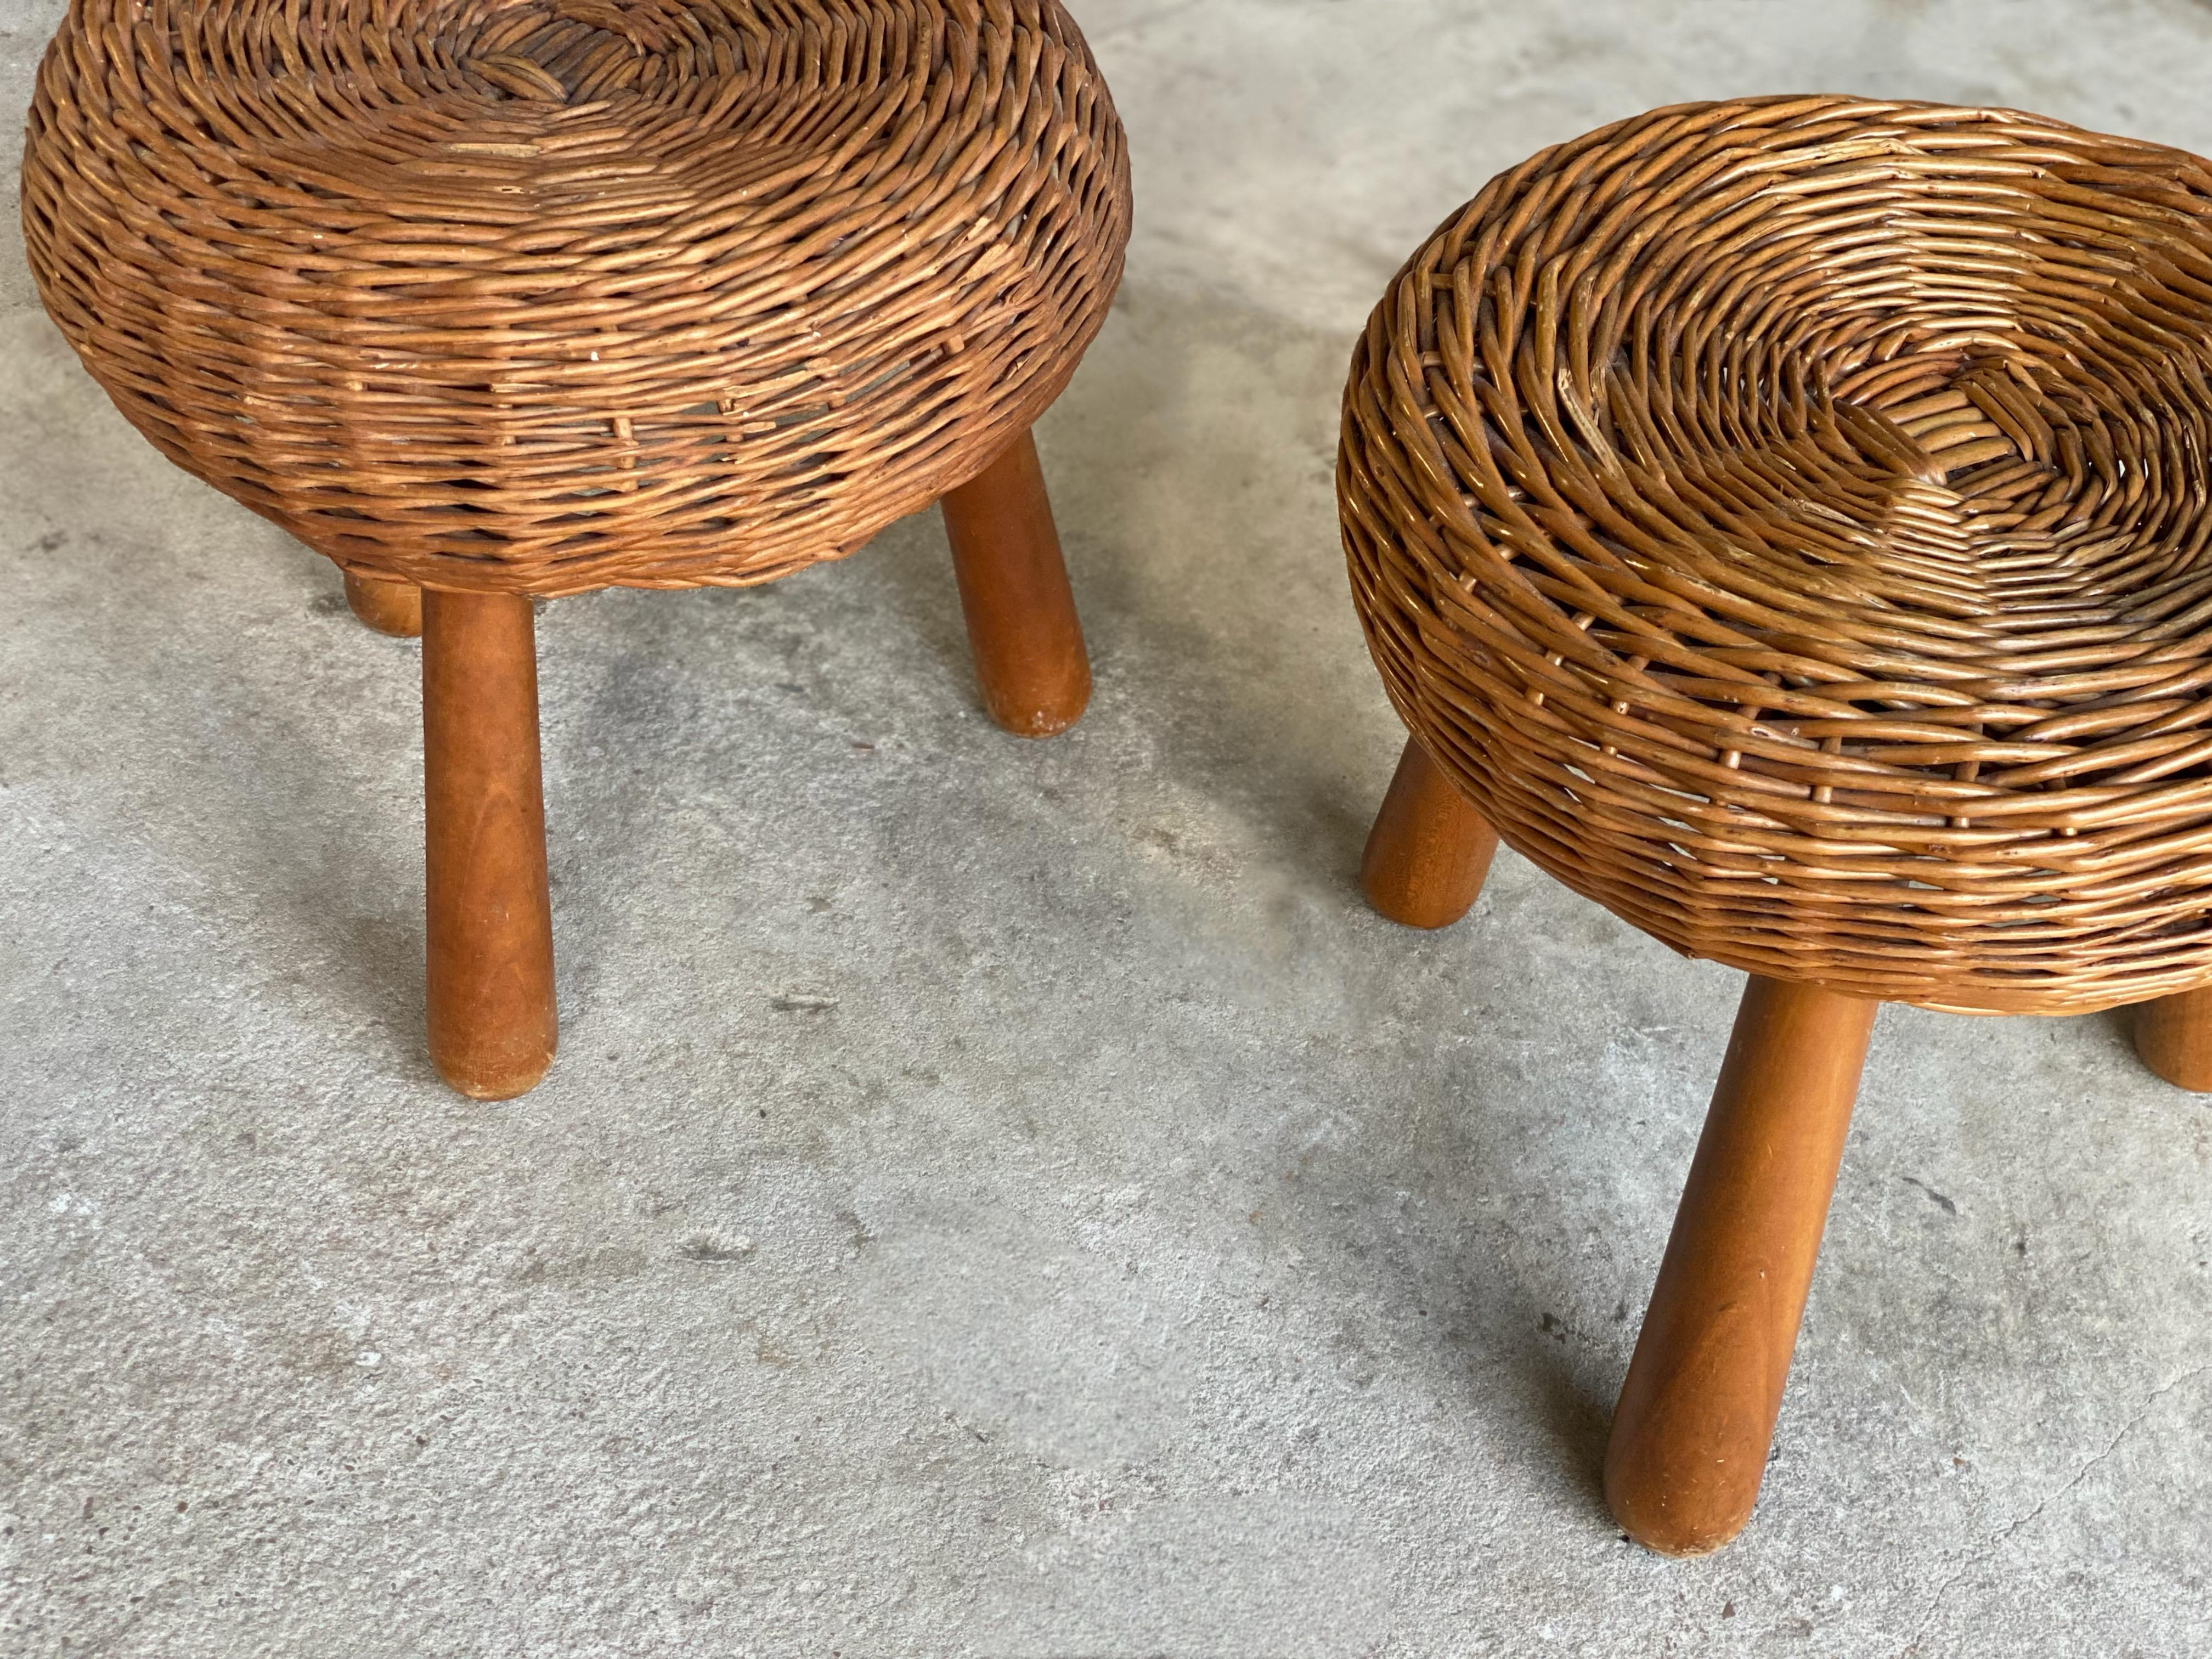 Mid-20th Century Pair of Woven Rattan Stools Attributed to Tony Paul